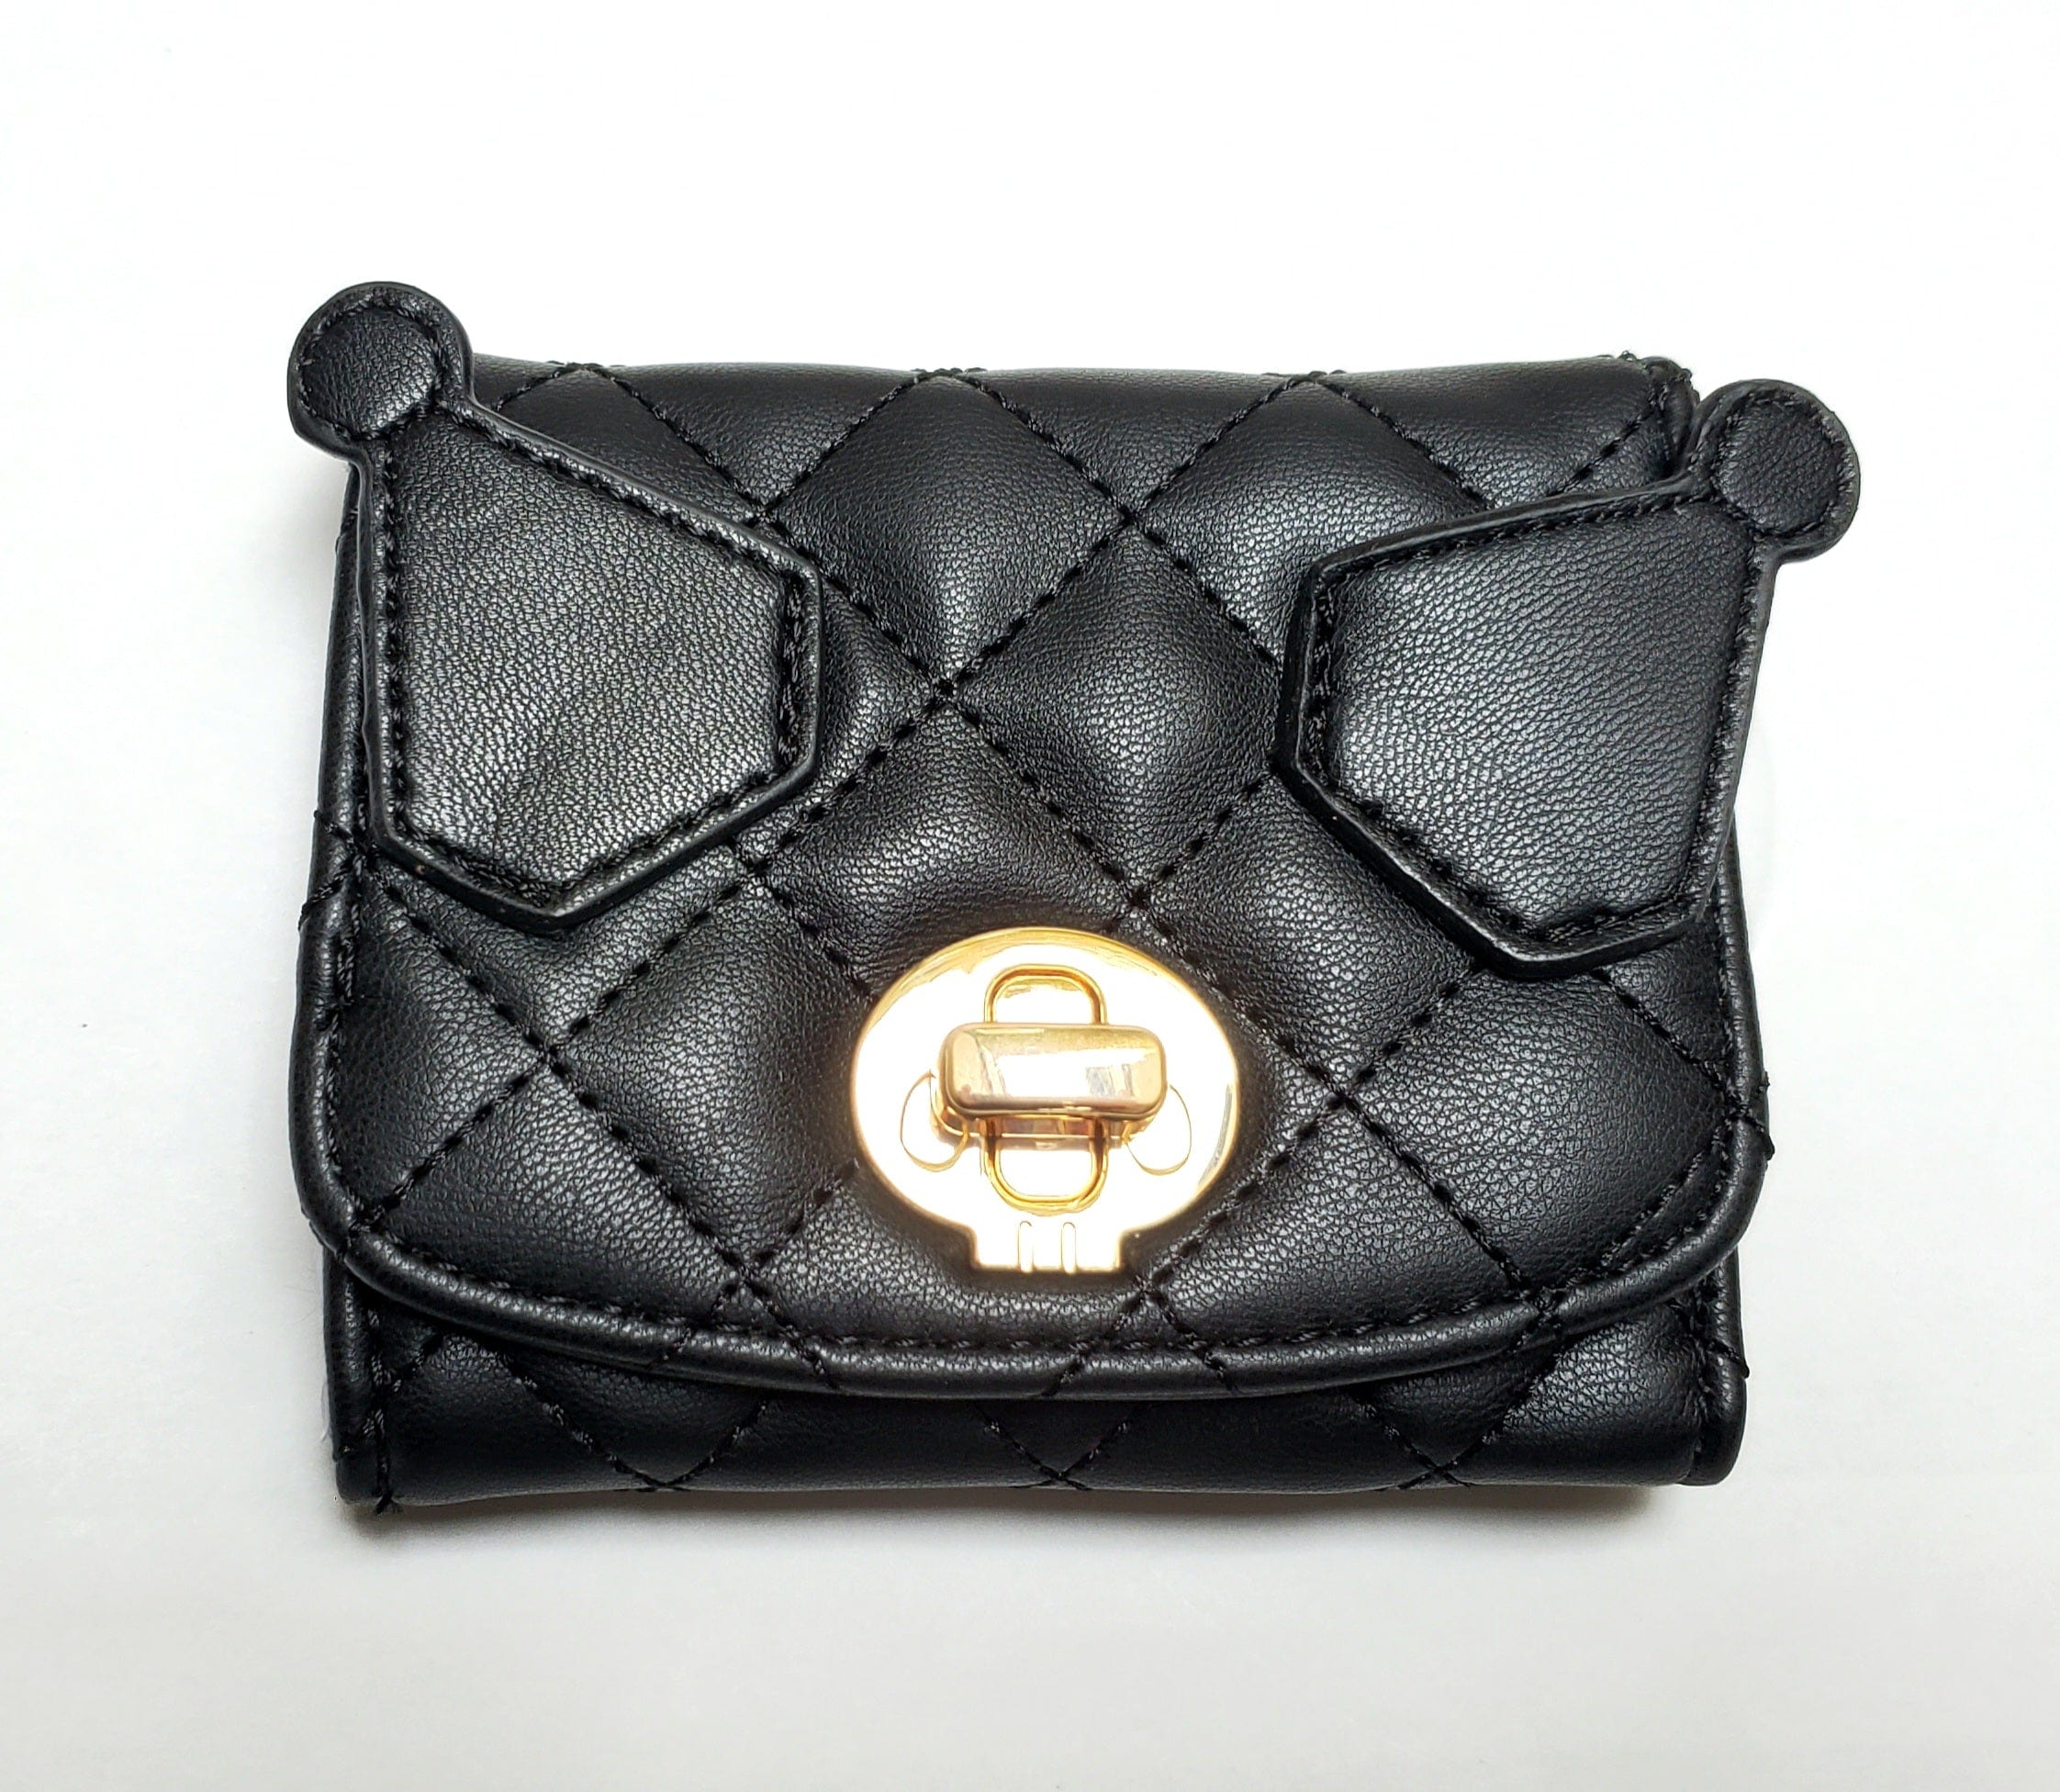 CHANEL VIP GIFT BAG LEATHER CELLPHONE CASE CARD HOLDER WALLET